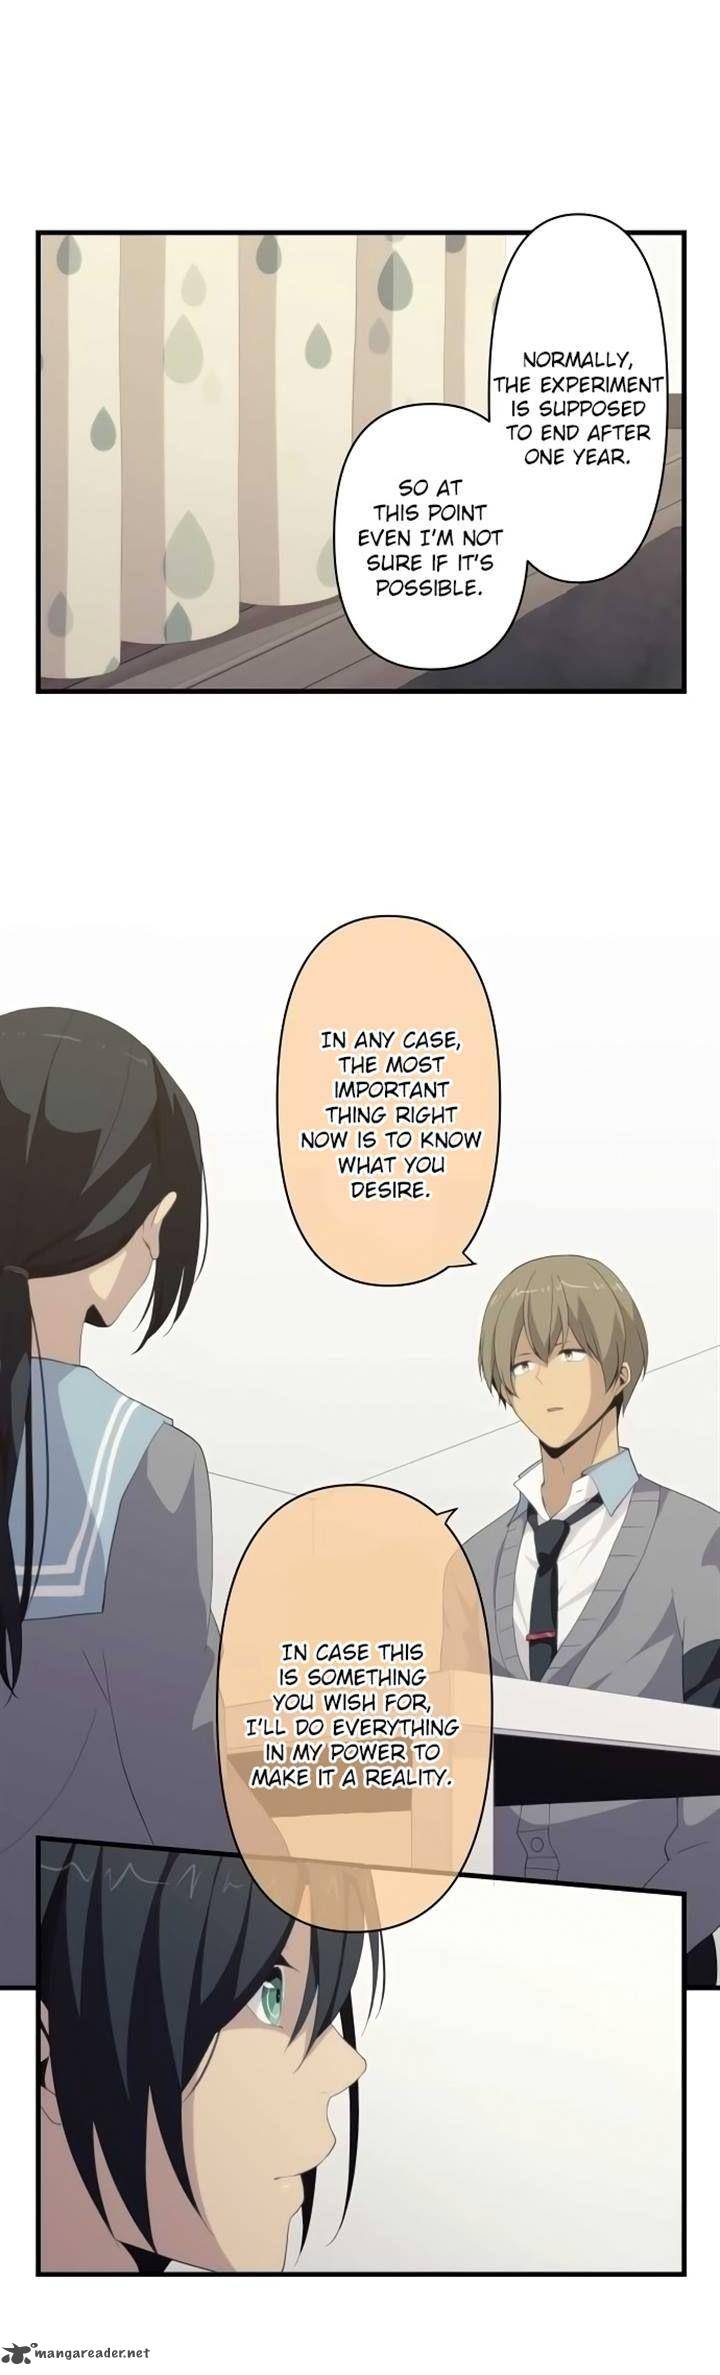 Relife 116 1